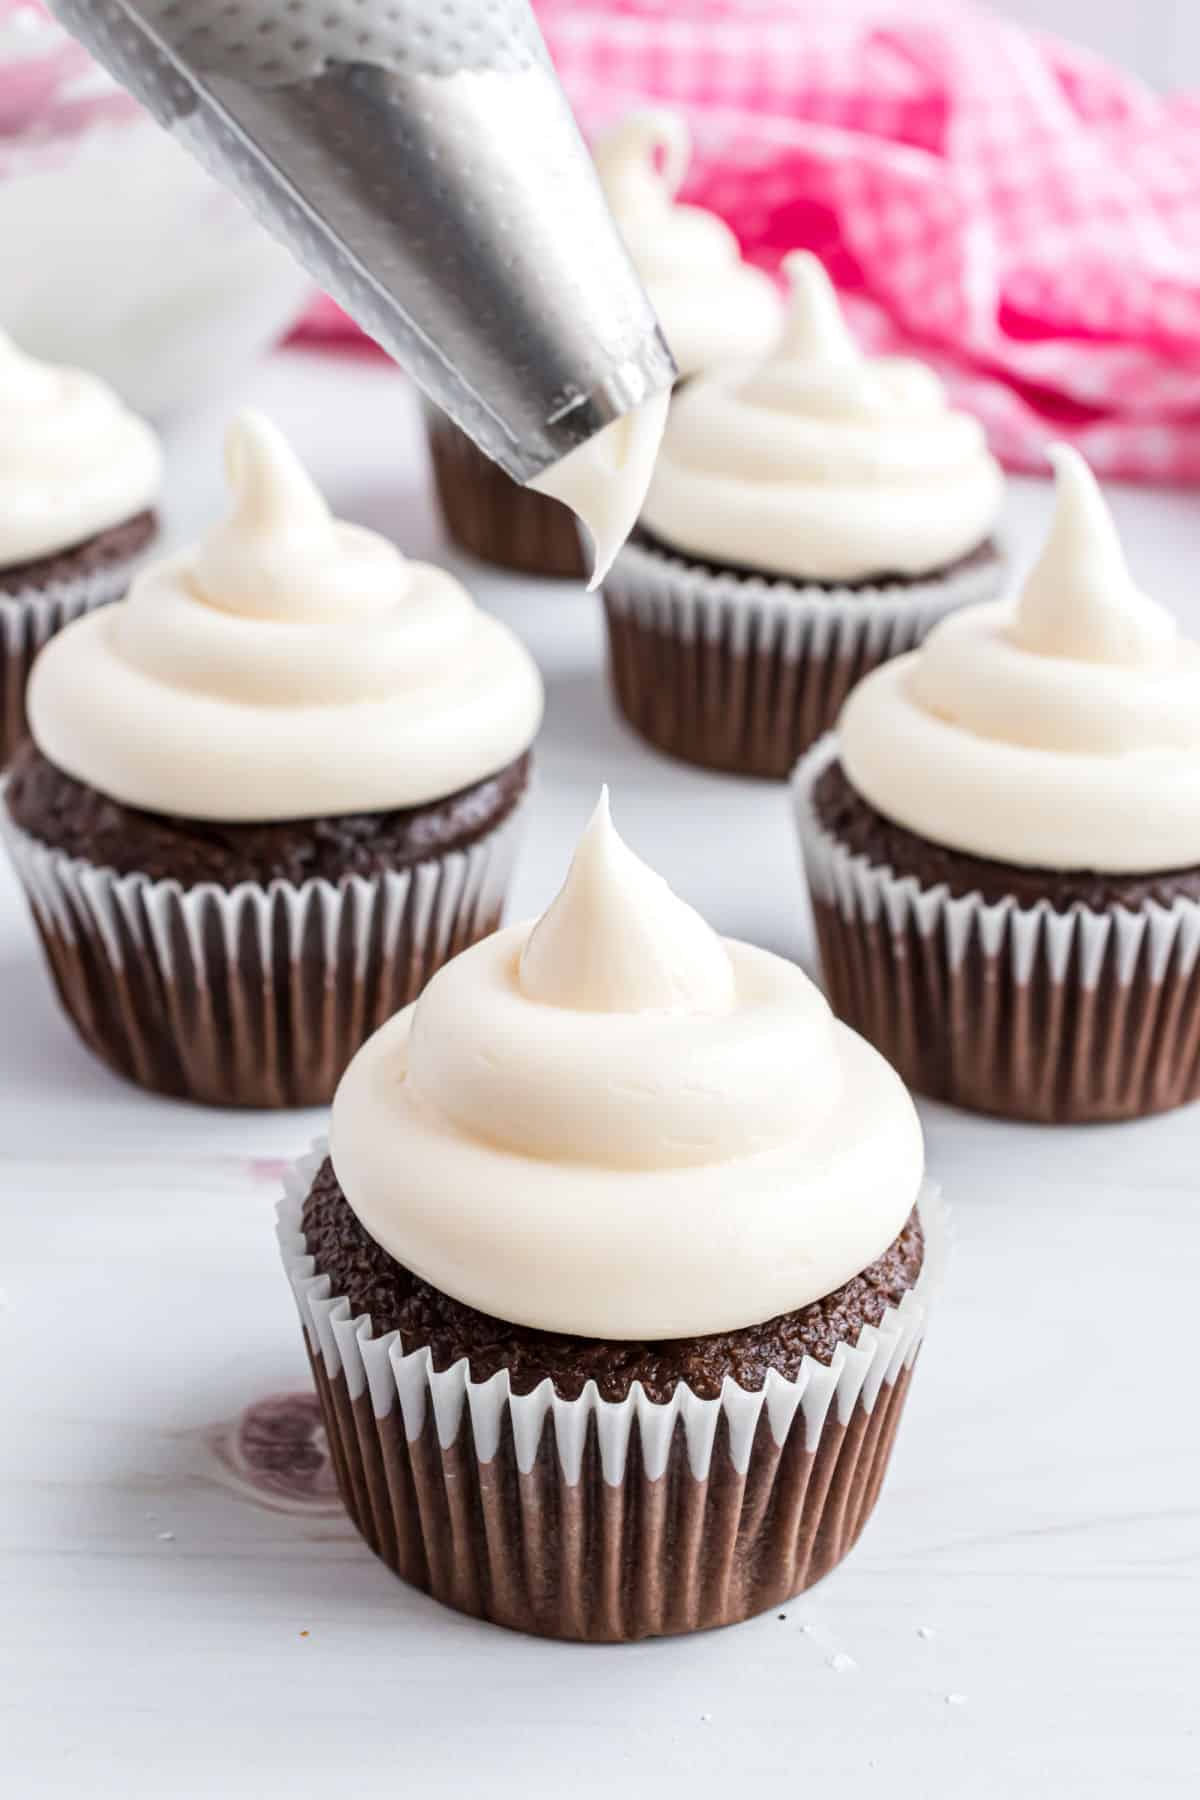 Chocolate cupcakes with marshmallow frosting.